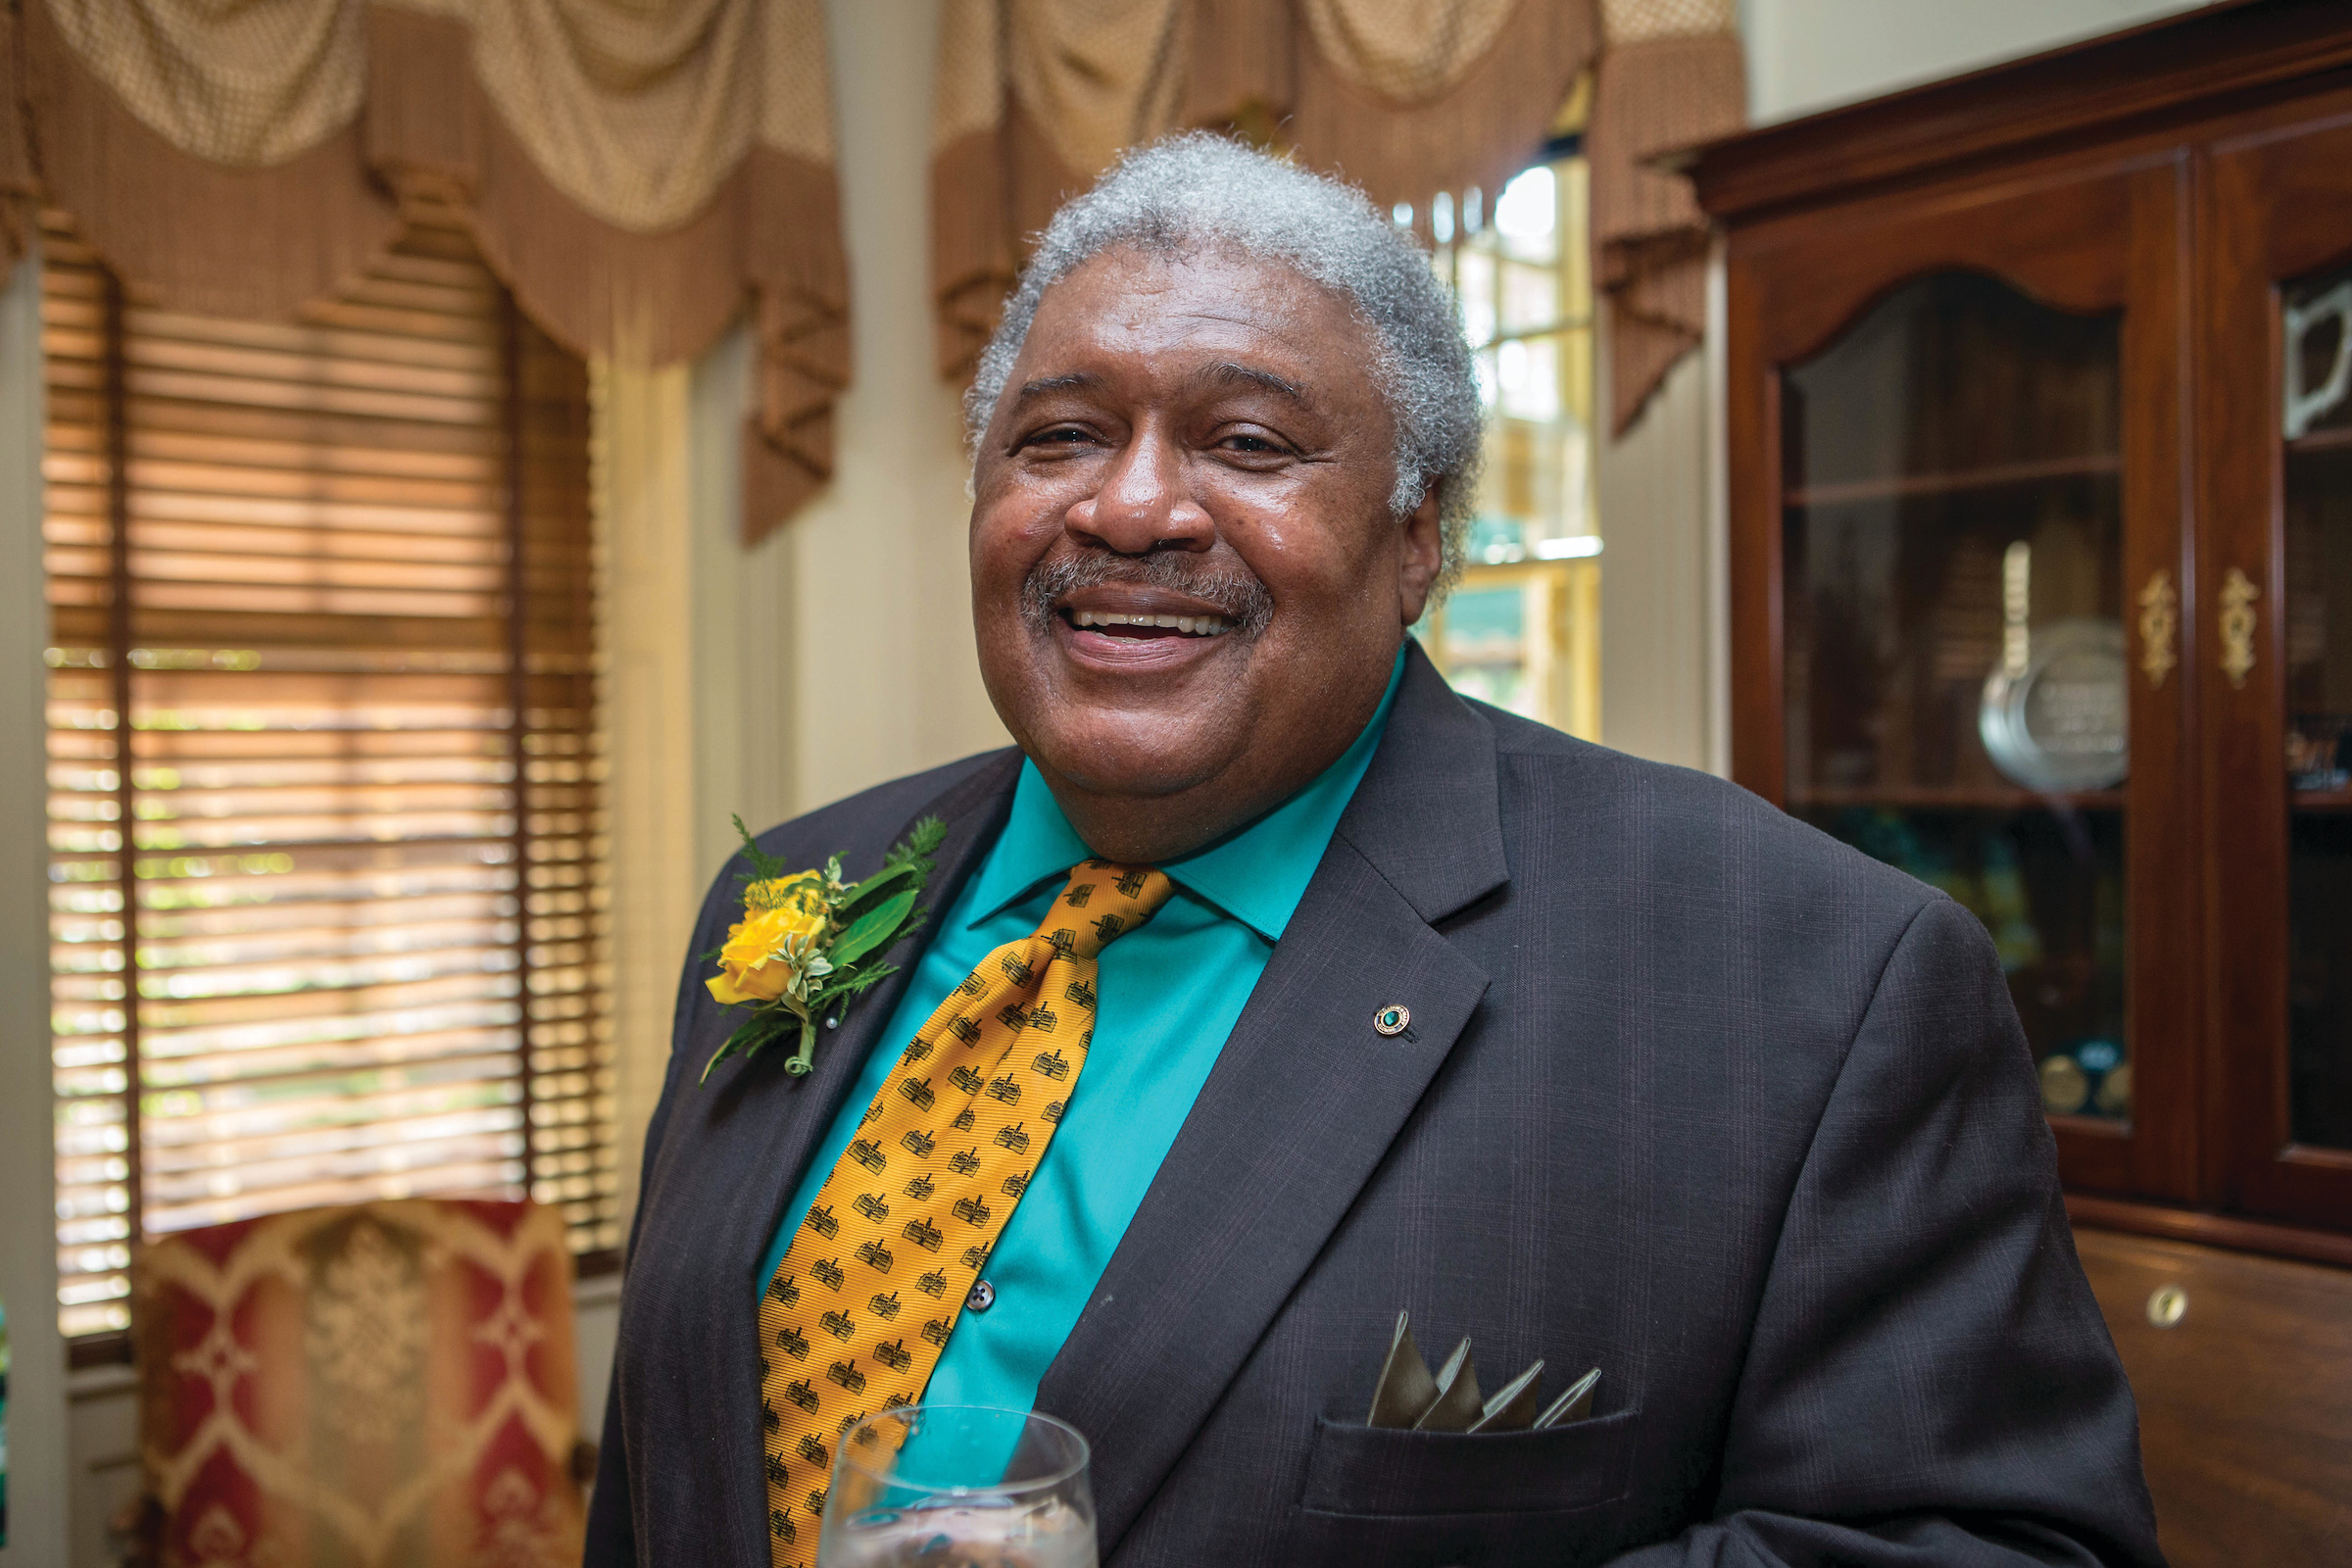 TRIBE PRIDE: The Honorable John Charles Thomas said he feels “such hope” for the future of William & Mary.